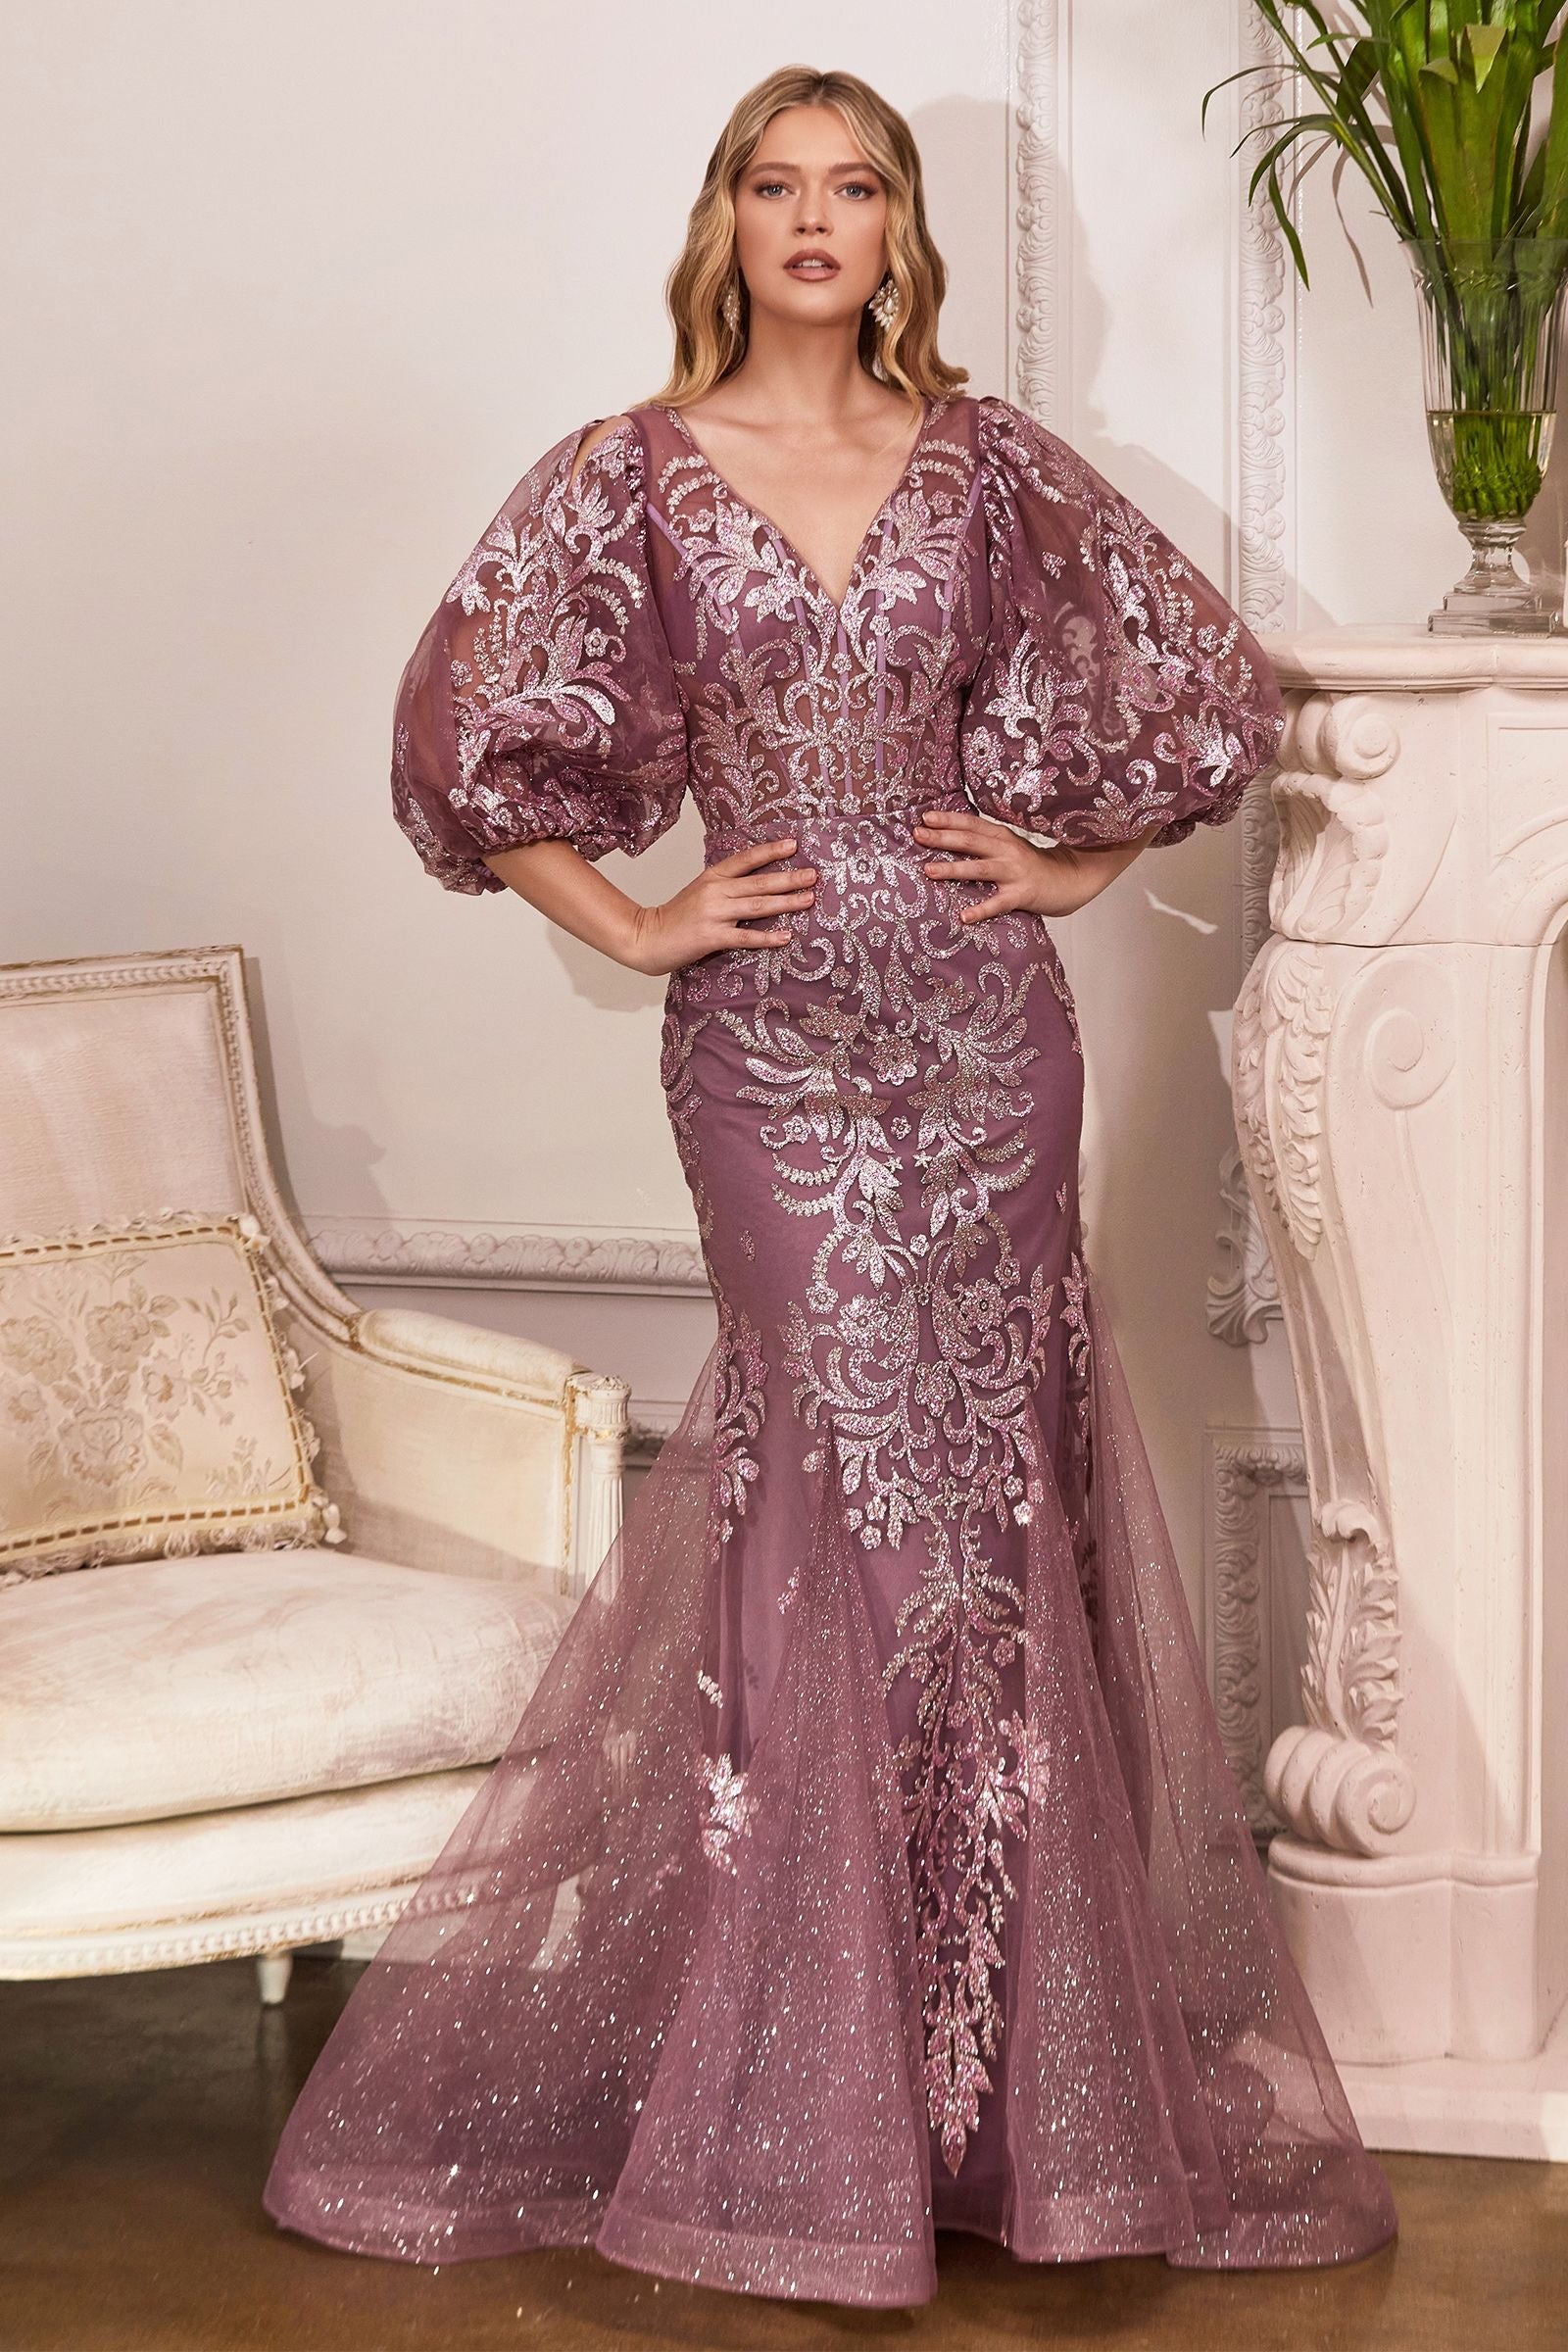 A show-stopping glittering mermaid gown, featuring elegant long sleeves